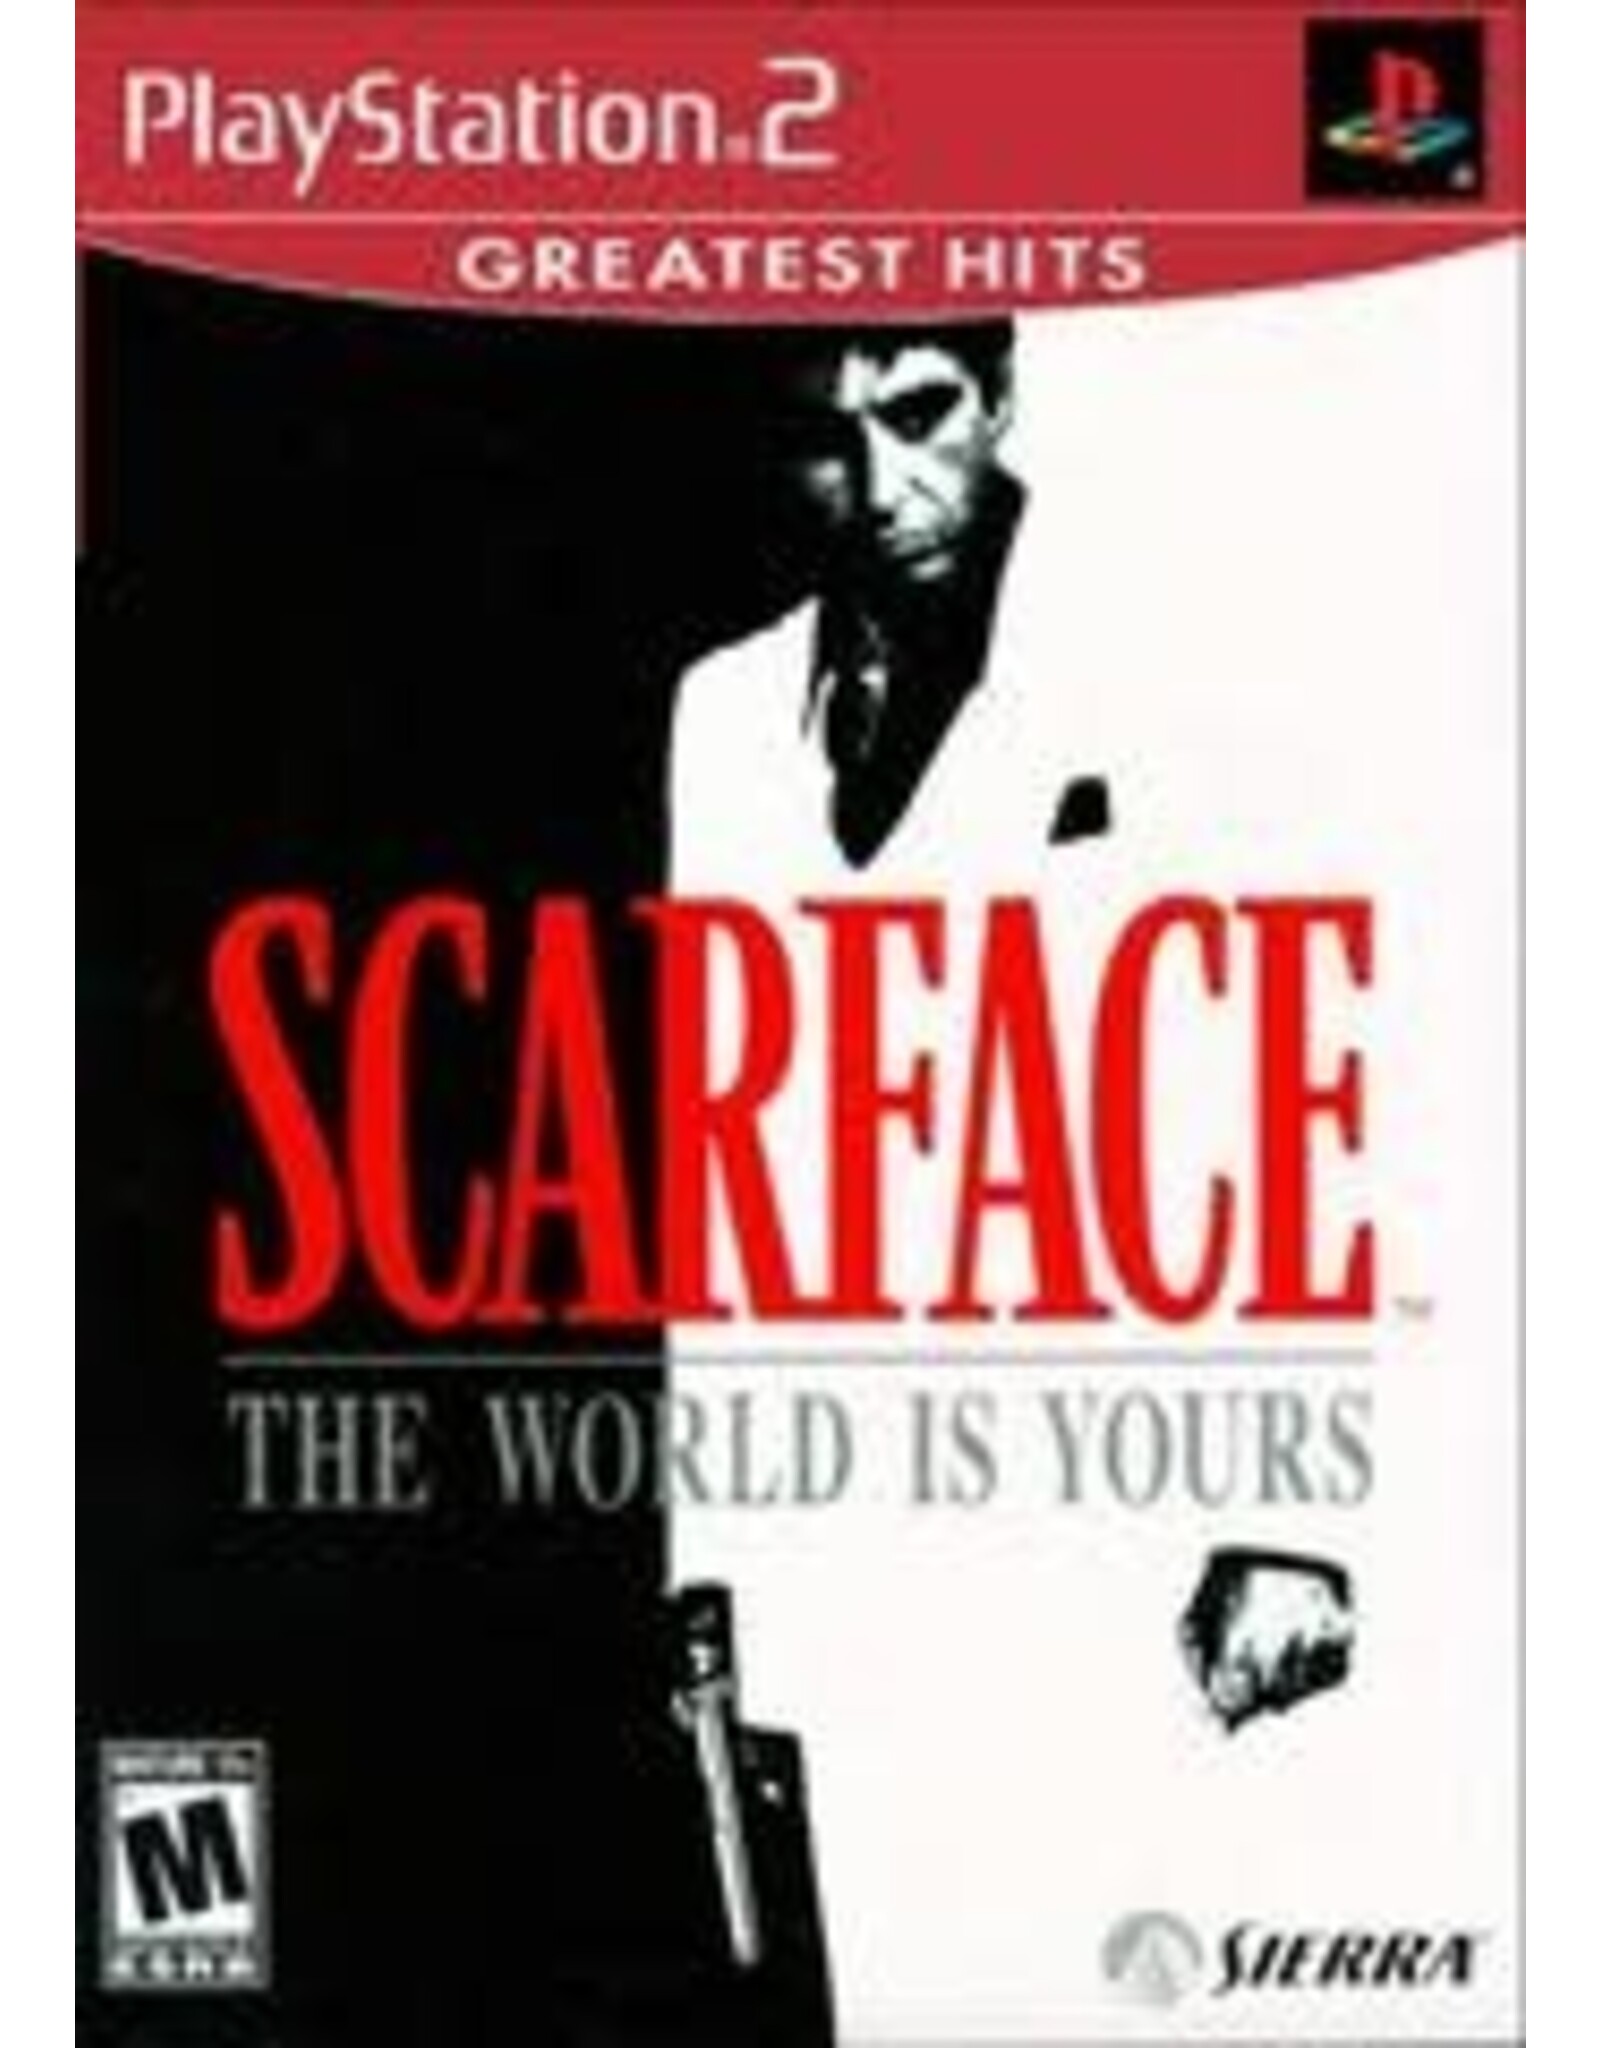 Playstation 2 Scarface the World is Yours (Greatest Hits, CiB)